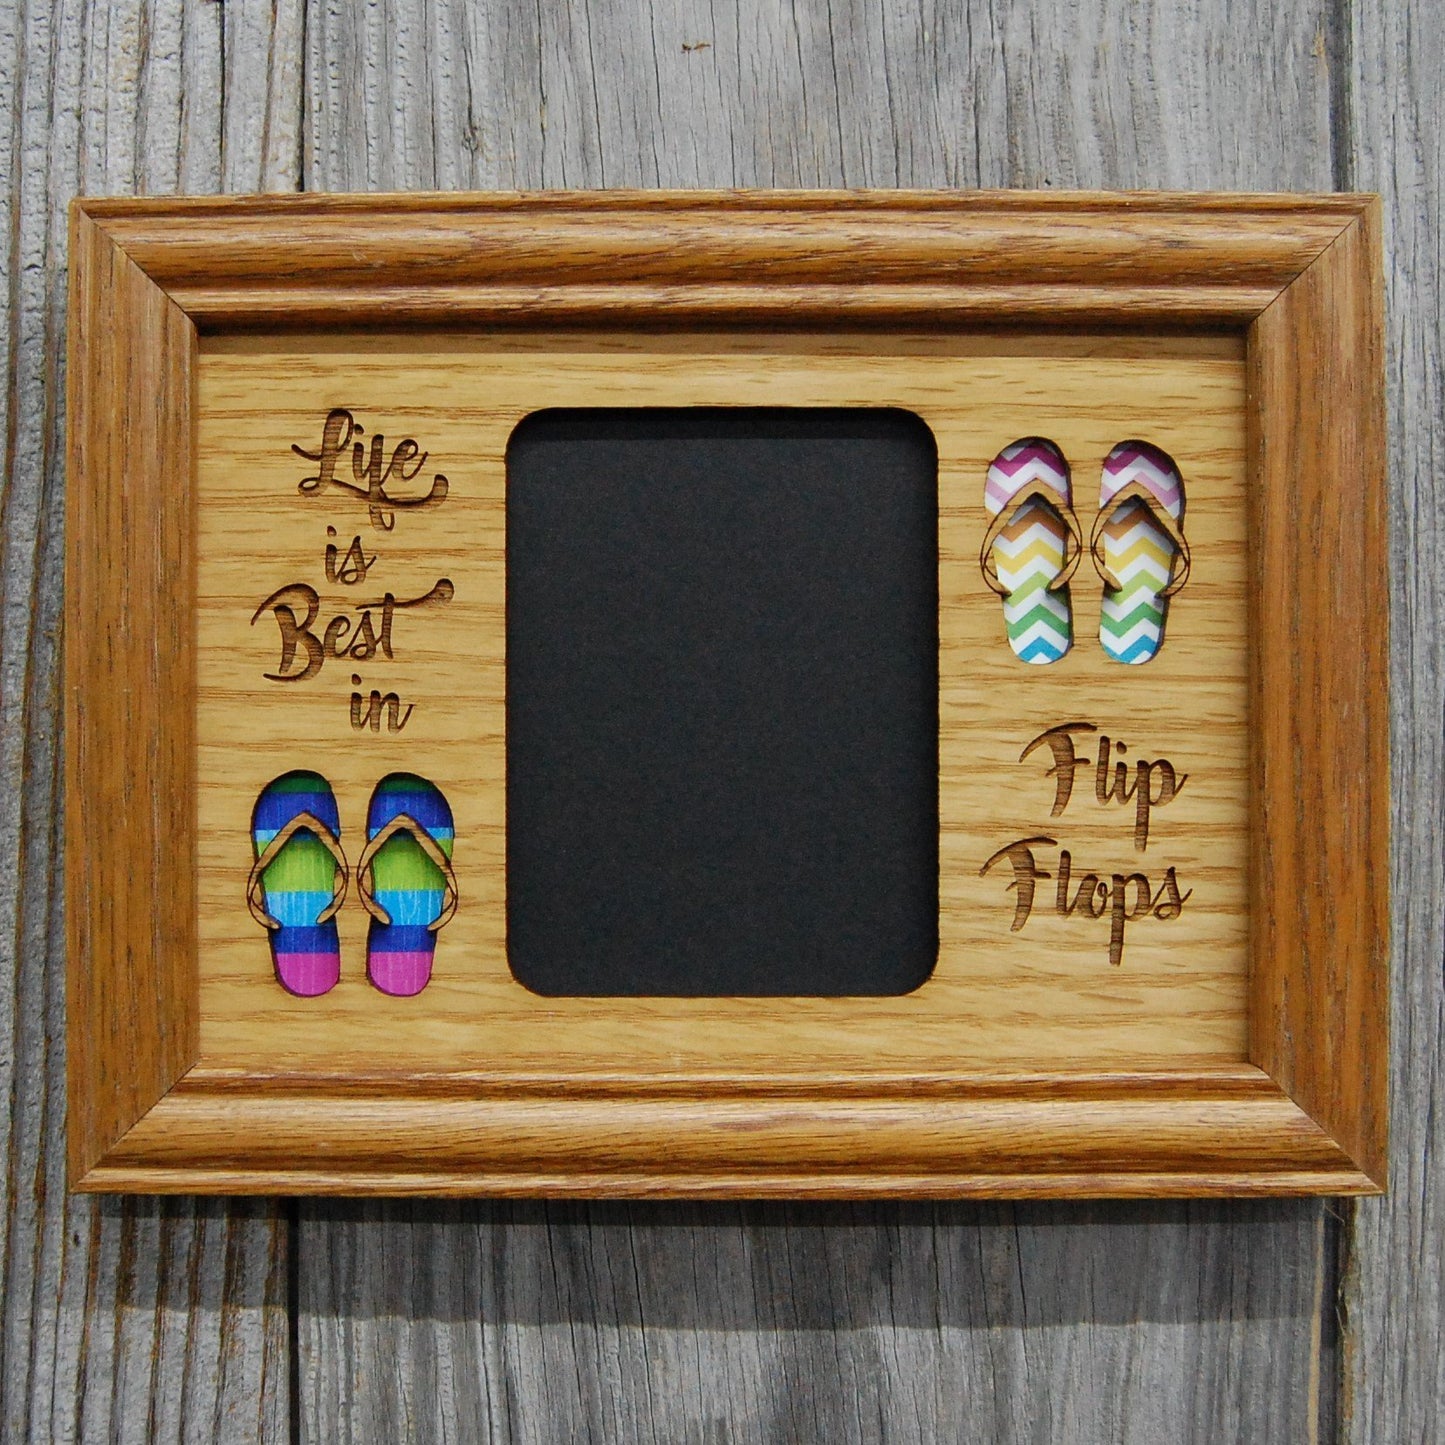 Life is Best in Flip Flops Picture Frame - 5x7 Frame Hold 3x4 Photo